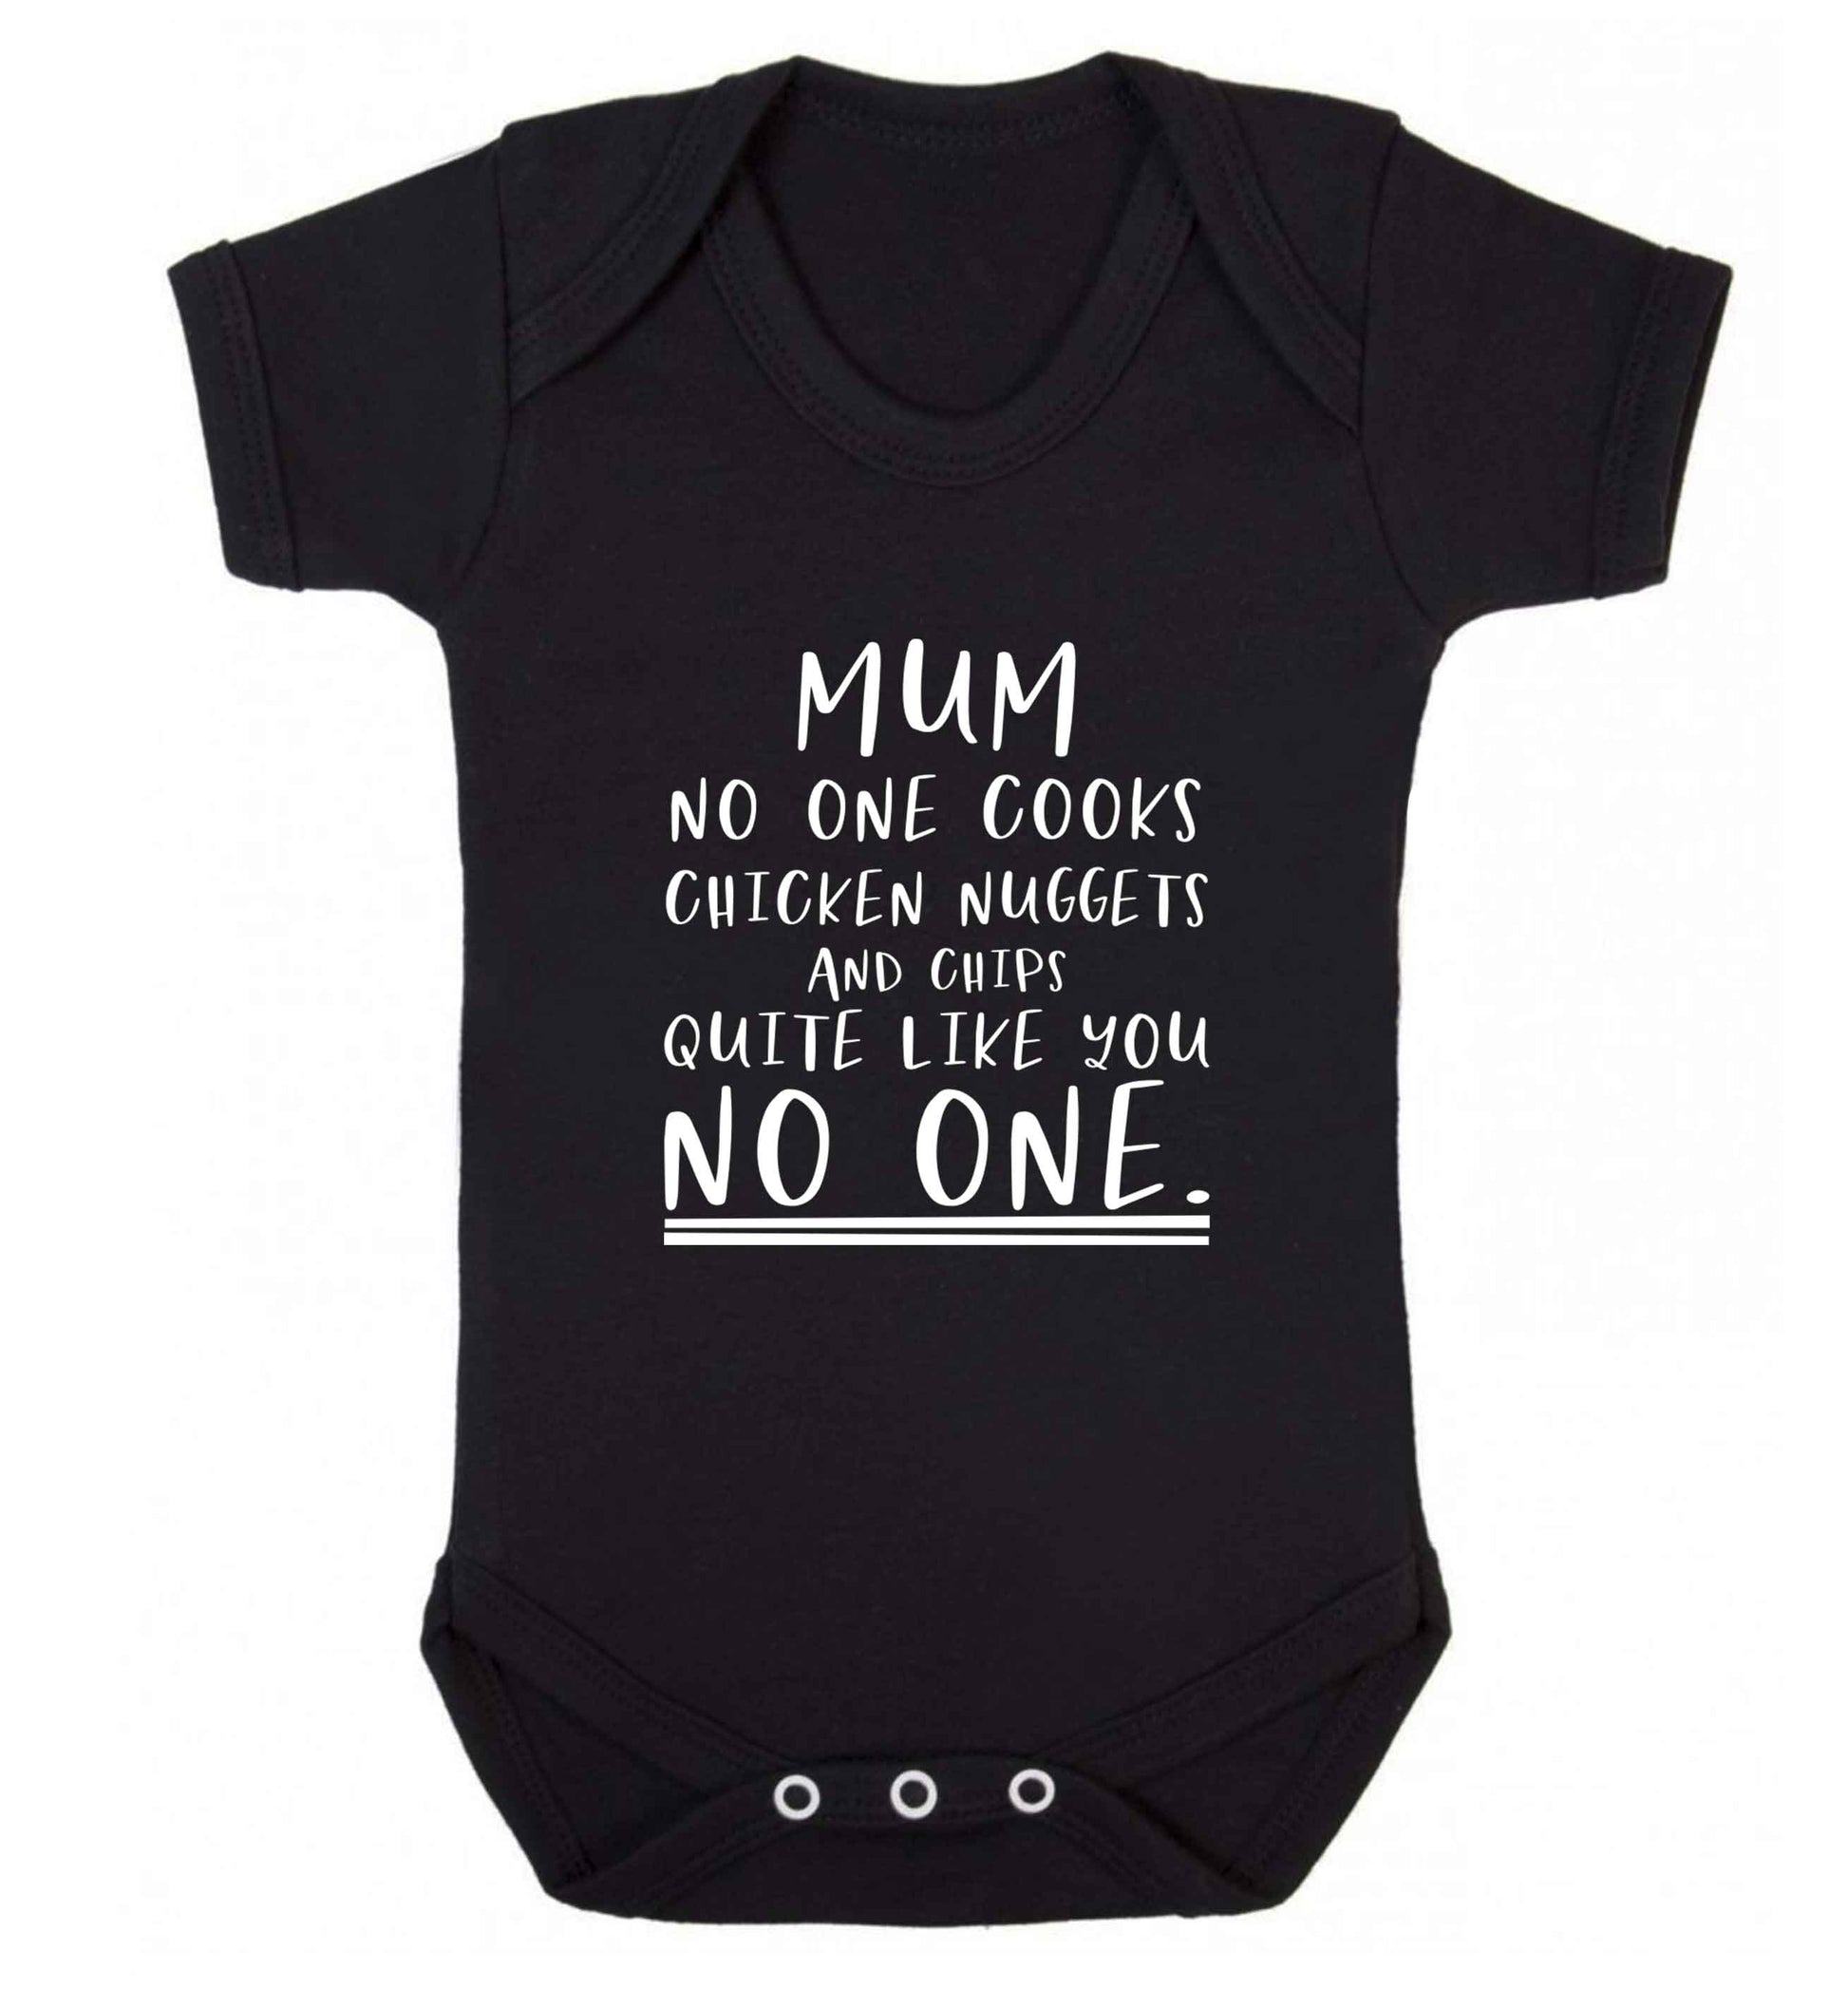 Super funny sassy gift for mother's day or birthday!  Mum no one cooks chicken nuggets and chips like you no one baby vest black 18-24 months